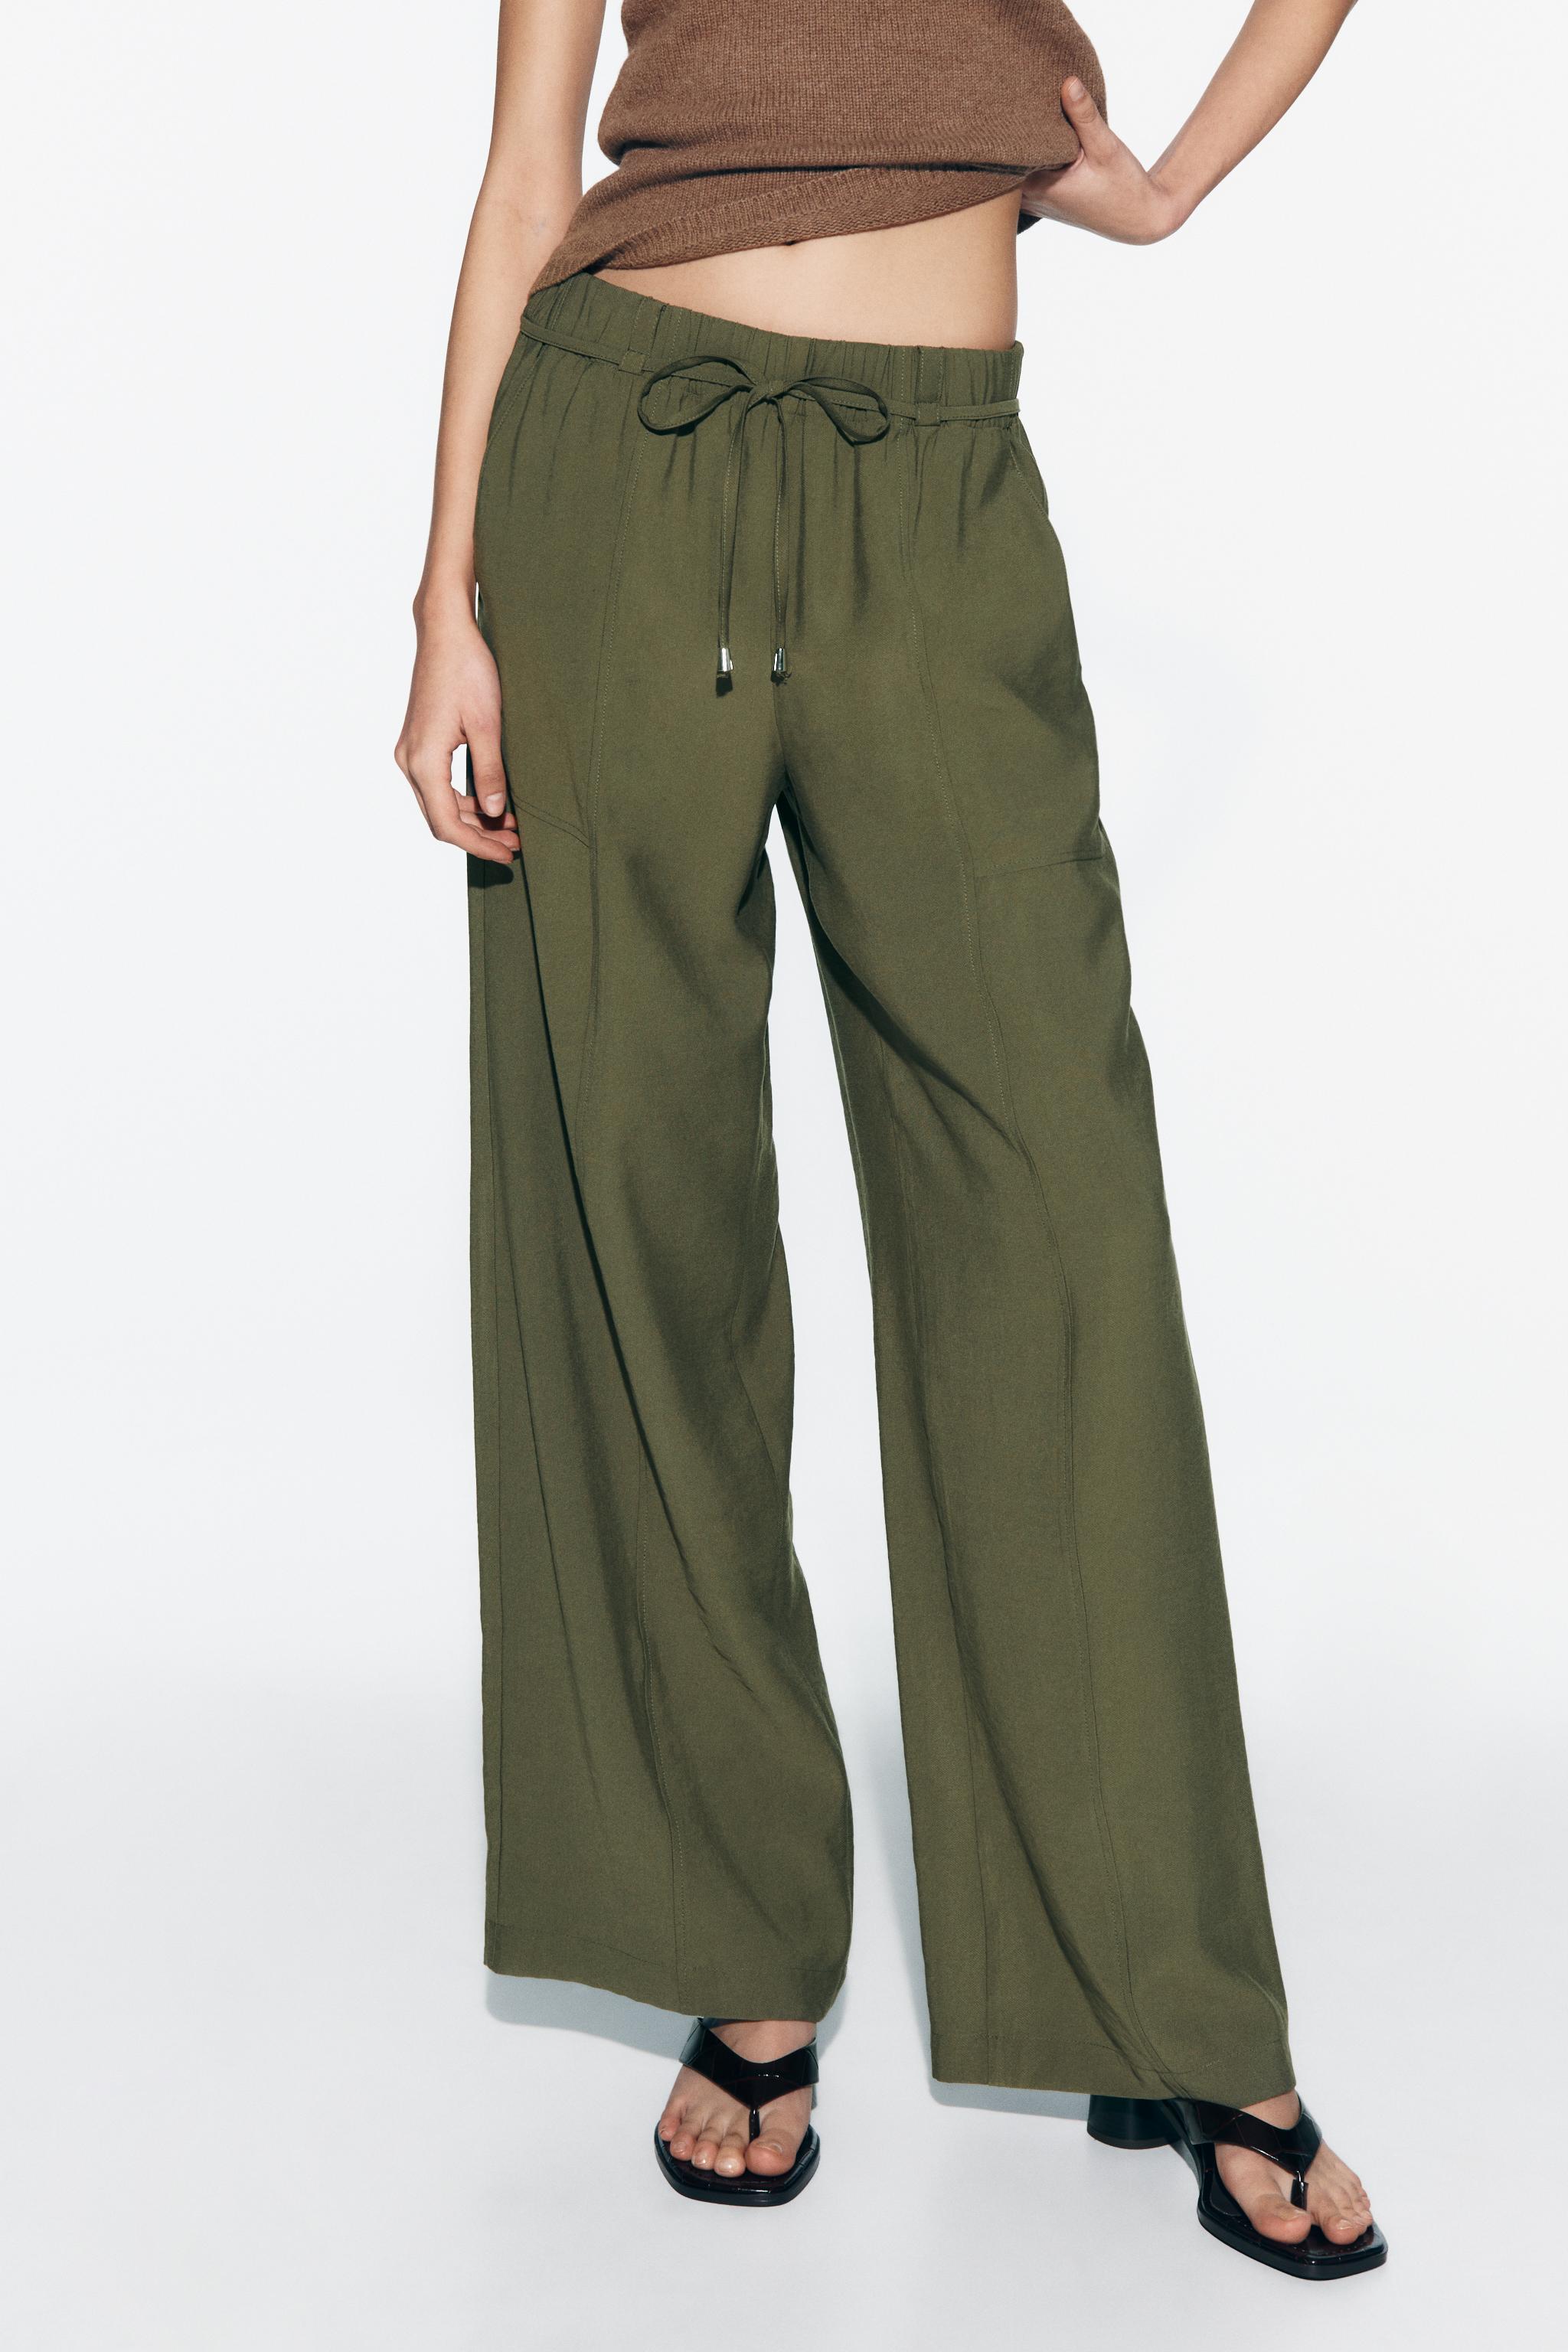 Chic Comfort Collection Women's Khaki Cotton Pull-on Pant with Elastic  Waist NWT 